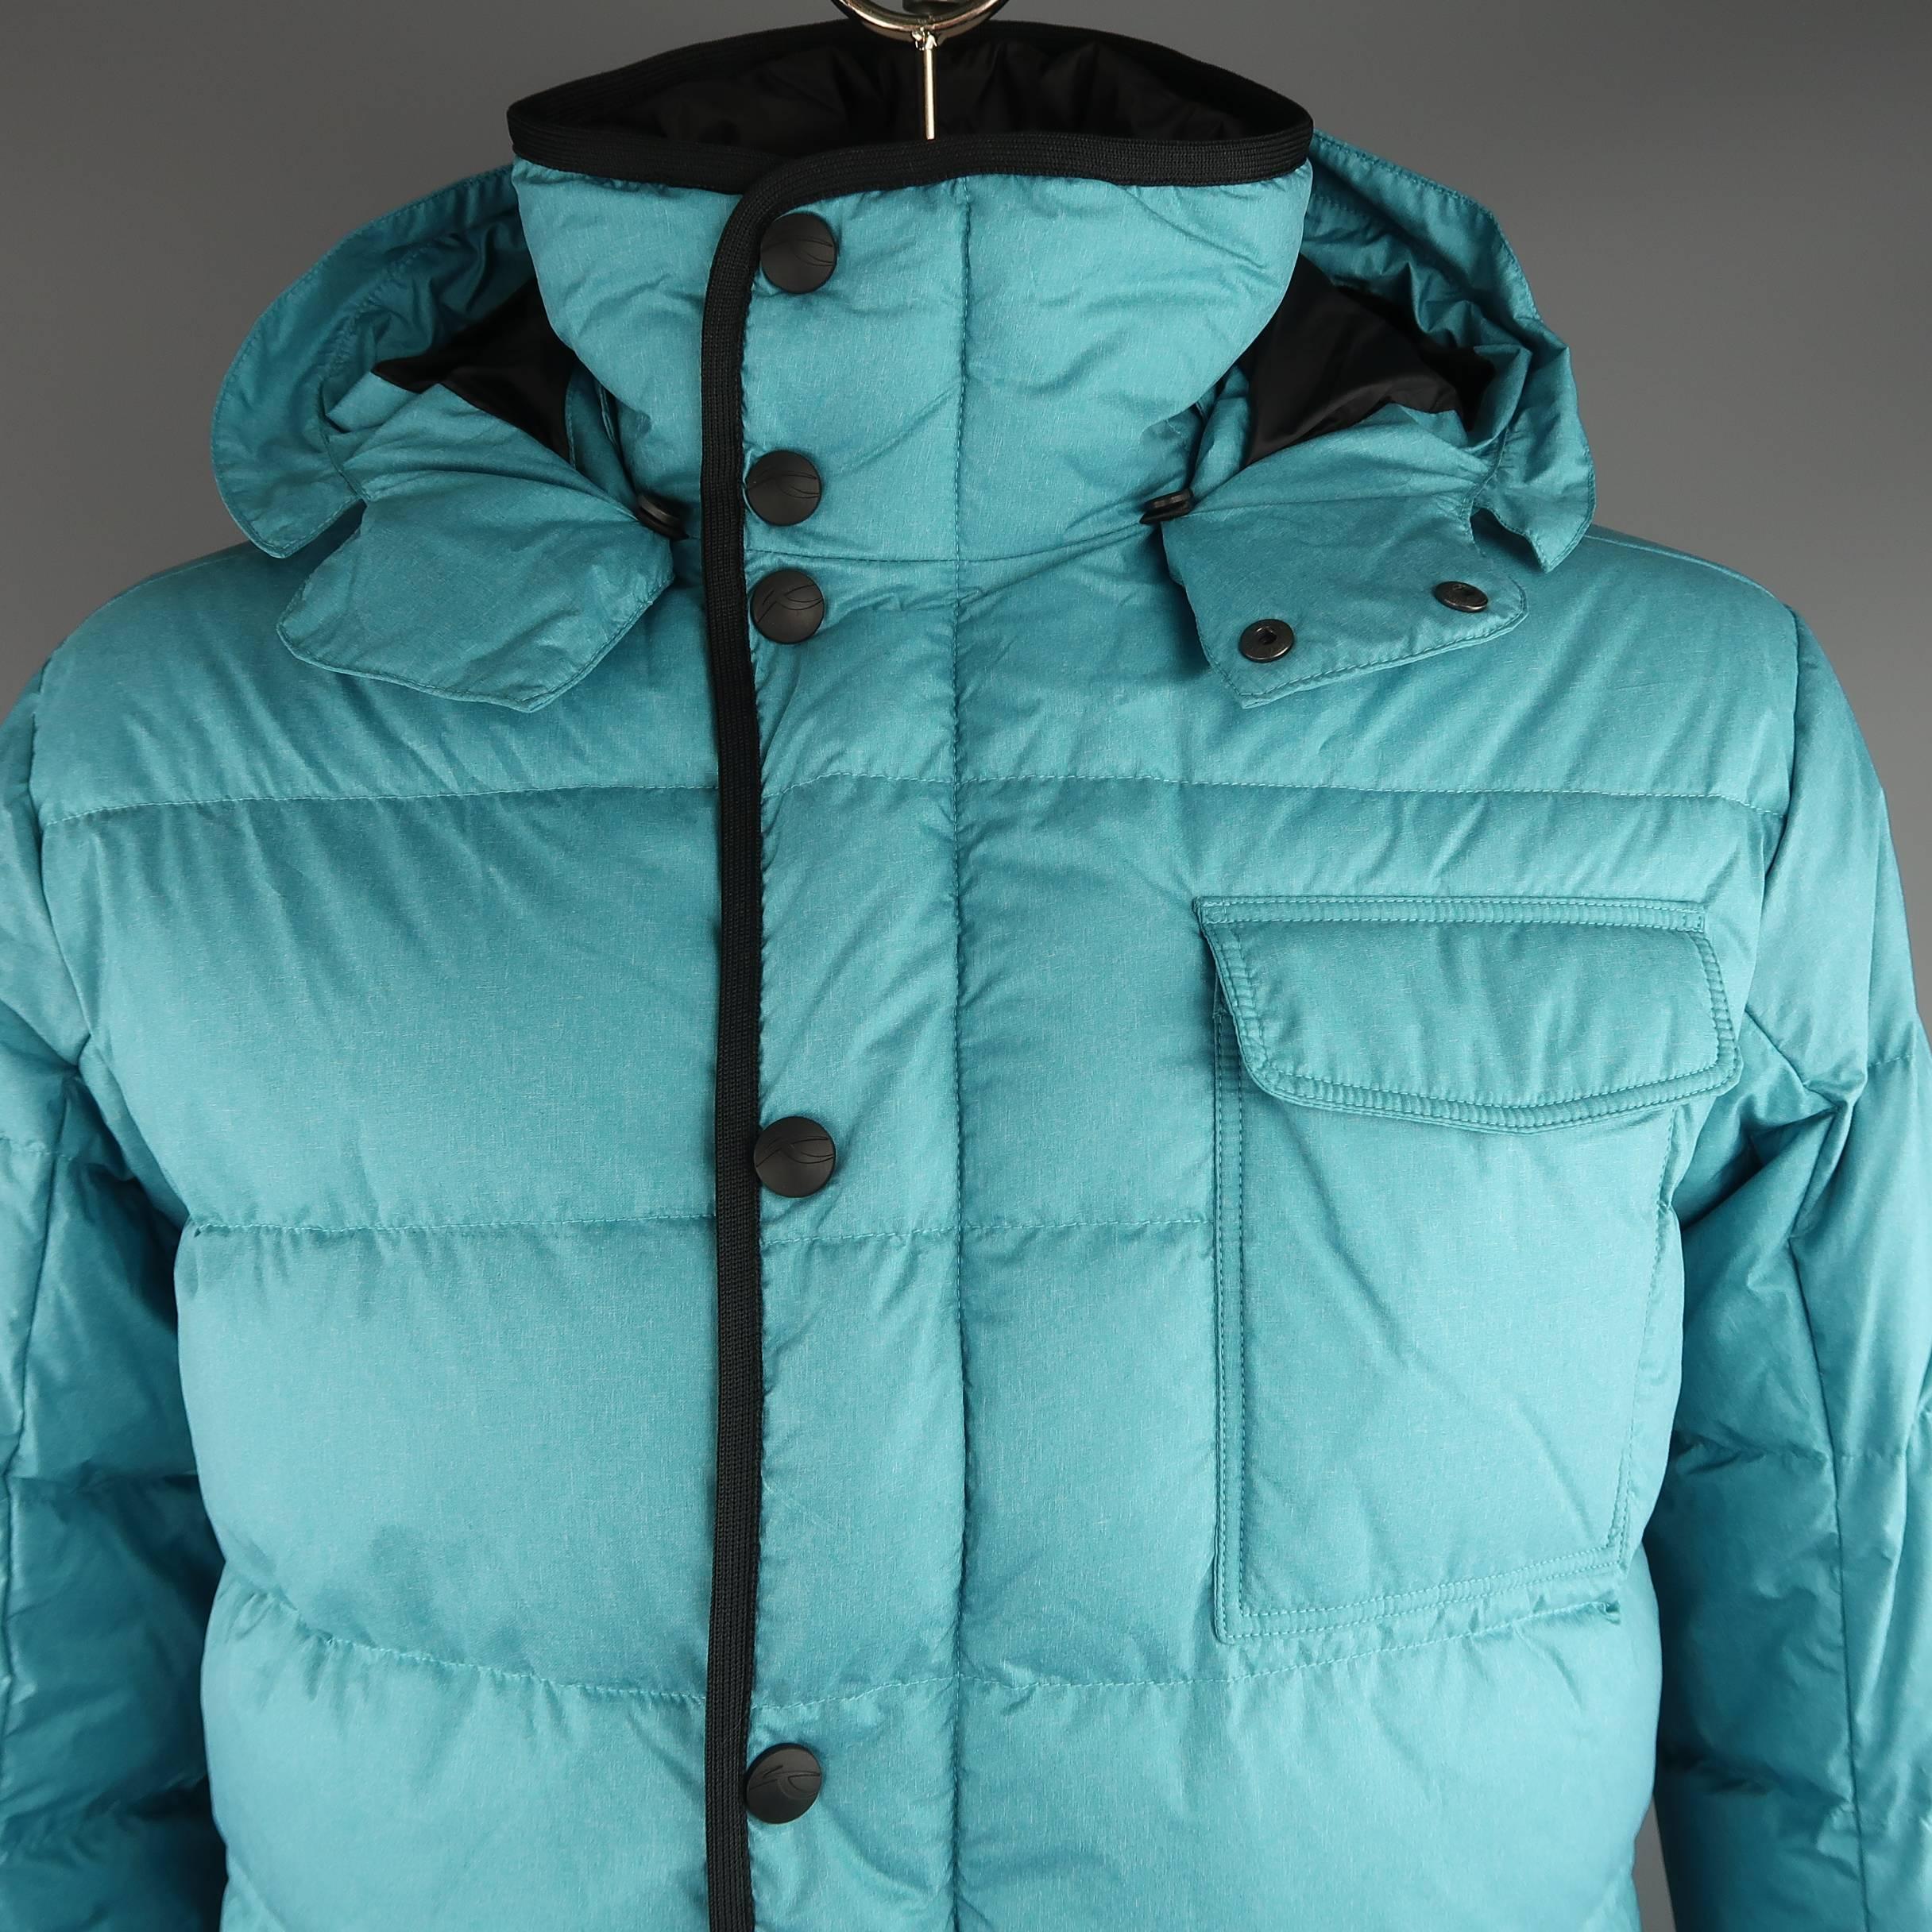 KHUS ski parka comes in quilted down feather teal polyester with a hight neck, snap placket zip closure, flap pockets, and detachable hoot. Made in Slovakia.
 
Excellent Pre-Owned Condition.
Marked: 52 L
 
Measurements:
 
Shoulder: 20 in.
Chest: 48